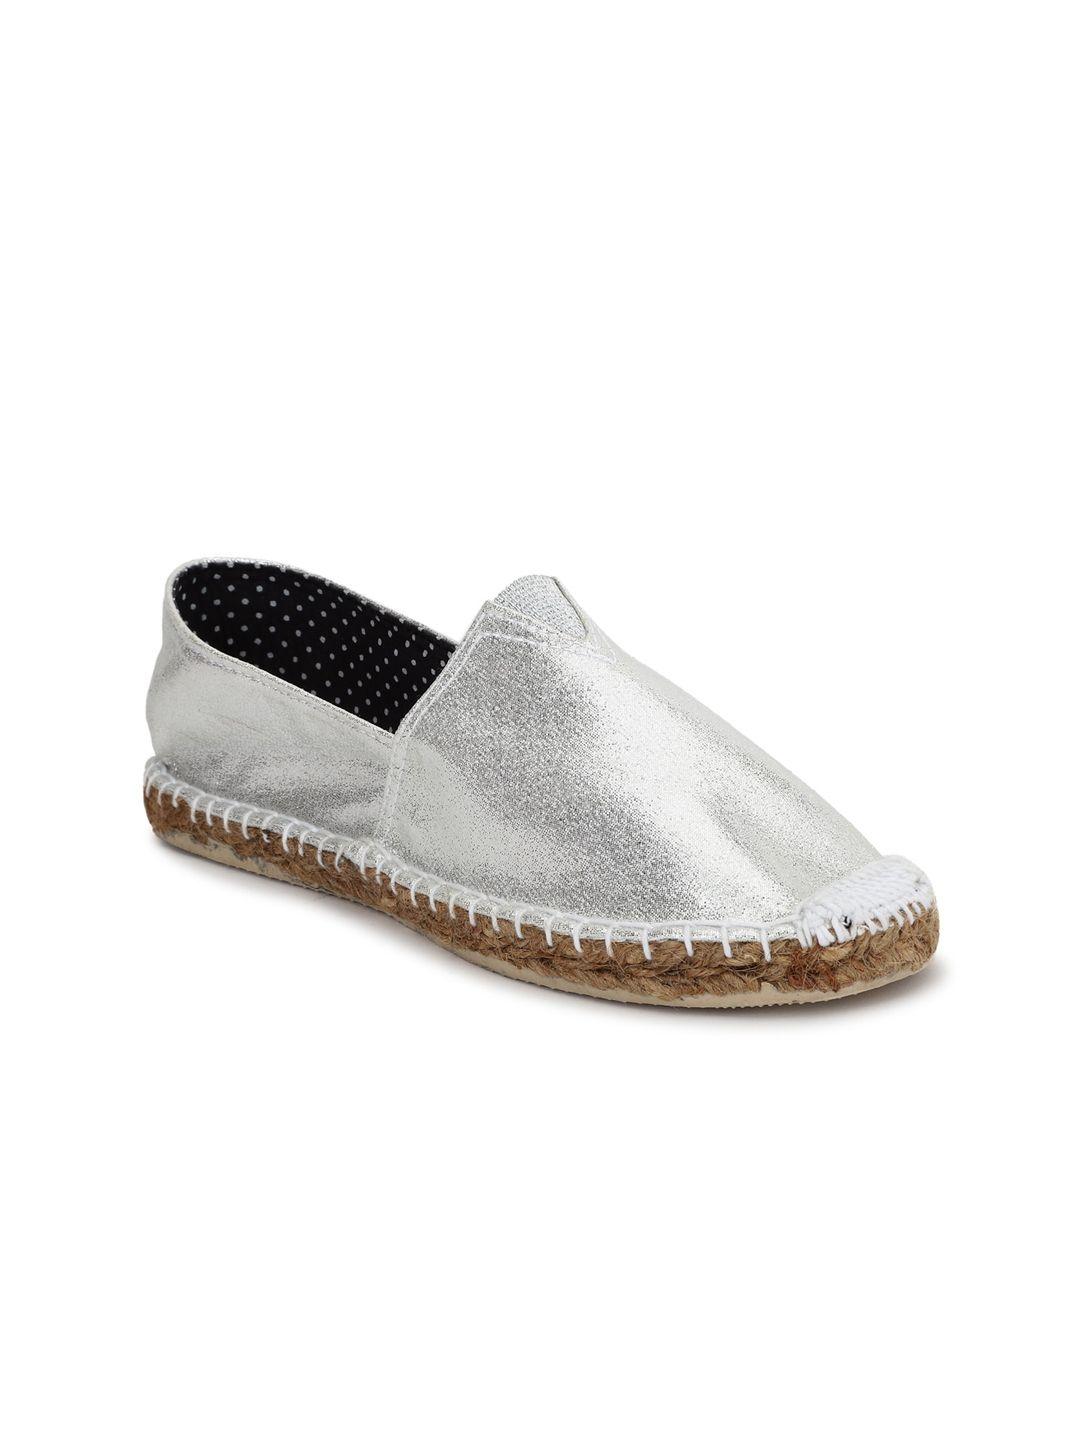 forever-21-women-silver-toned-pu-espadrilles